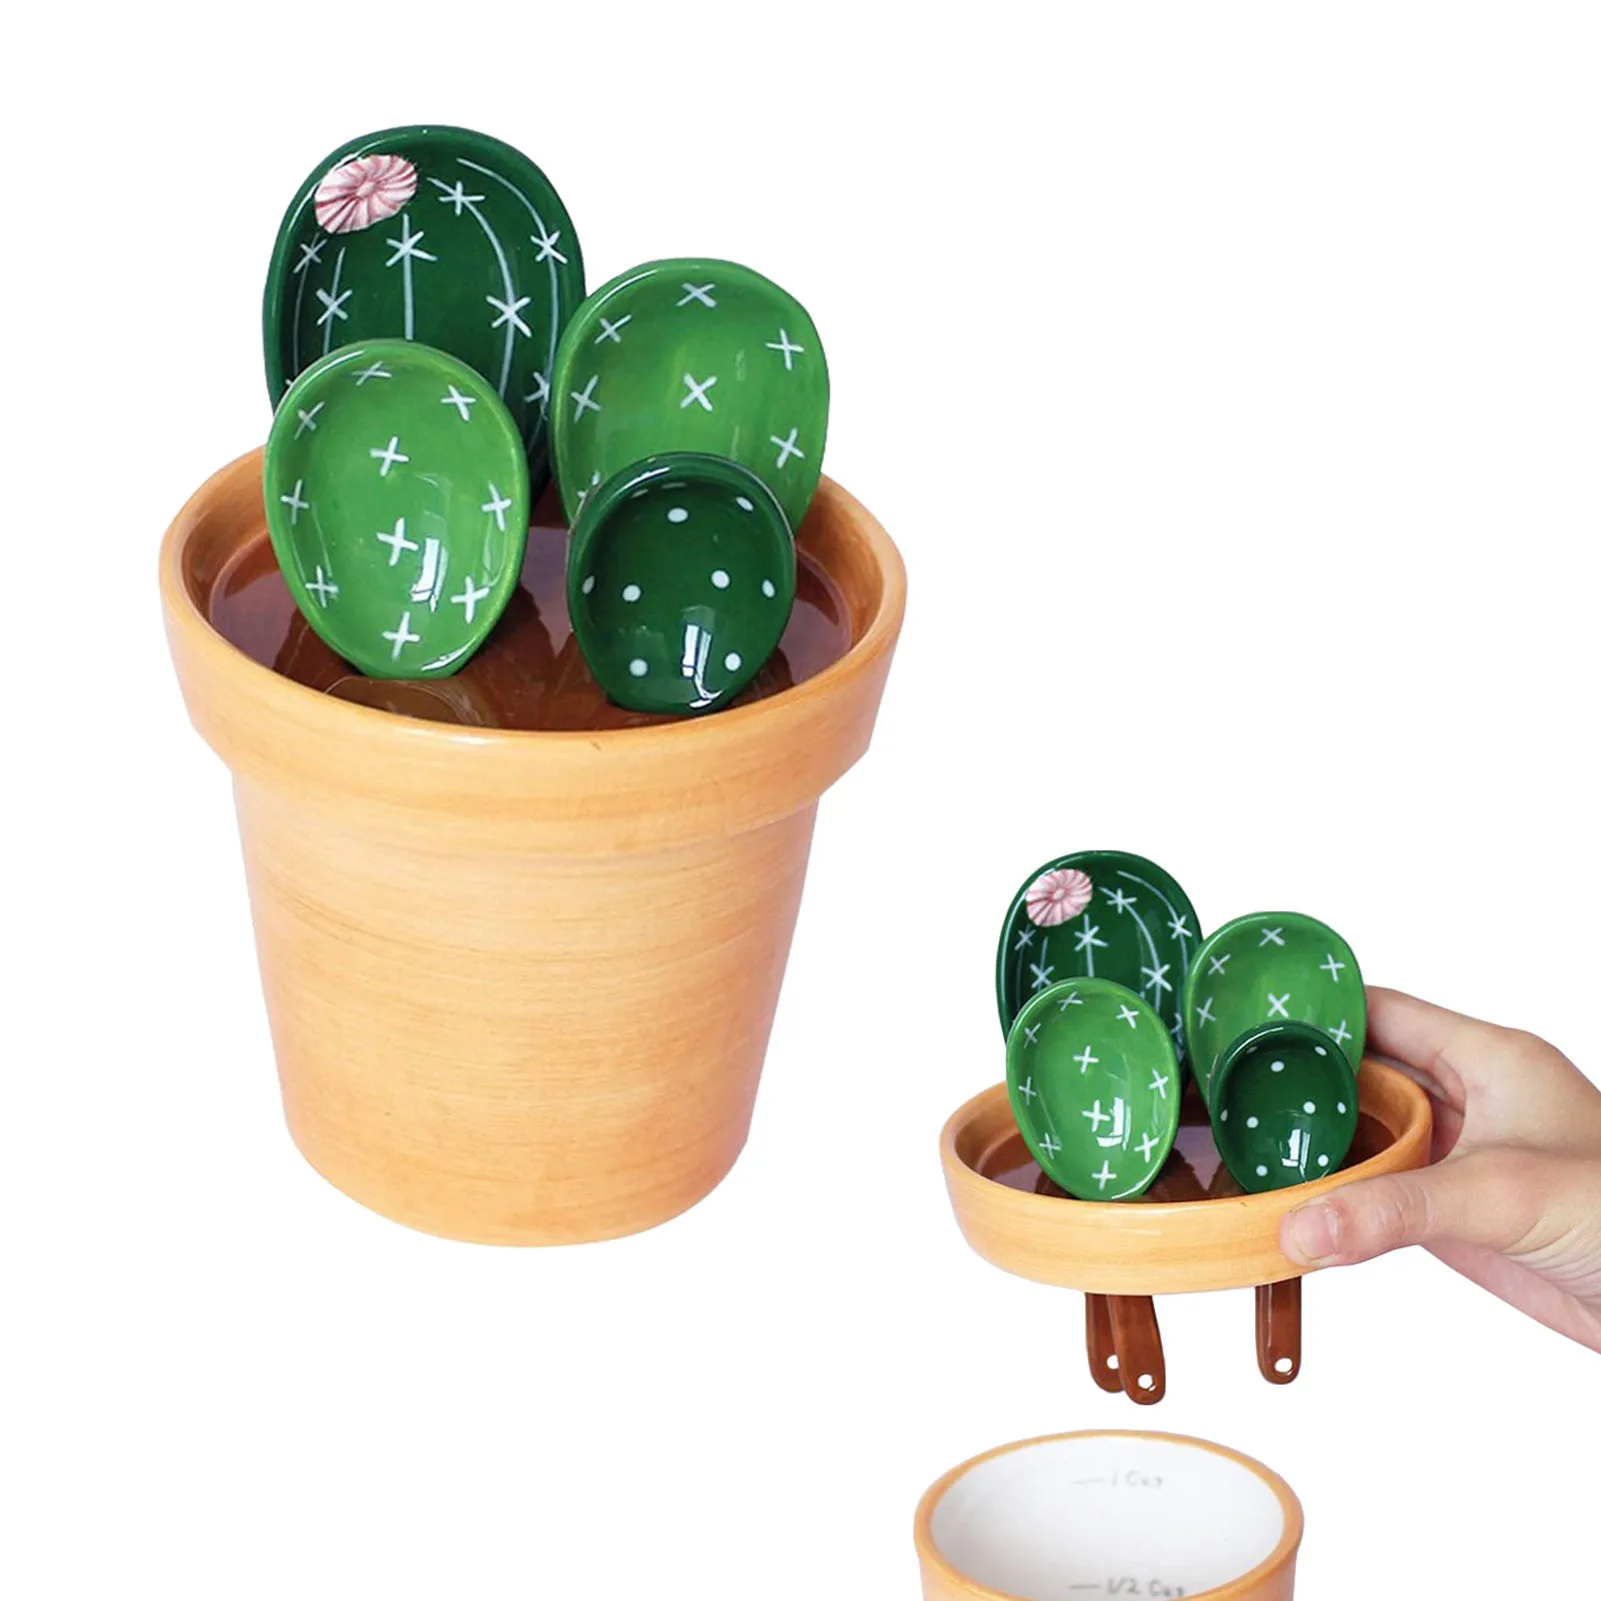 Cactus Measuring Spoons Set in Pot Ceramic Baking Measuring Spoons Cup with Holder for Dry Wet Ingredients Cute Cactus Figurine